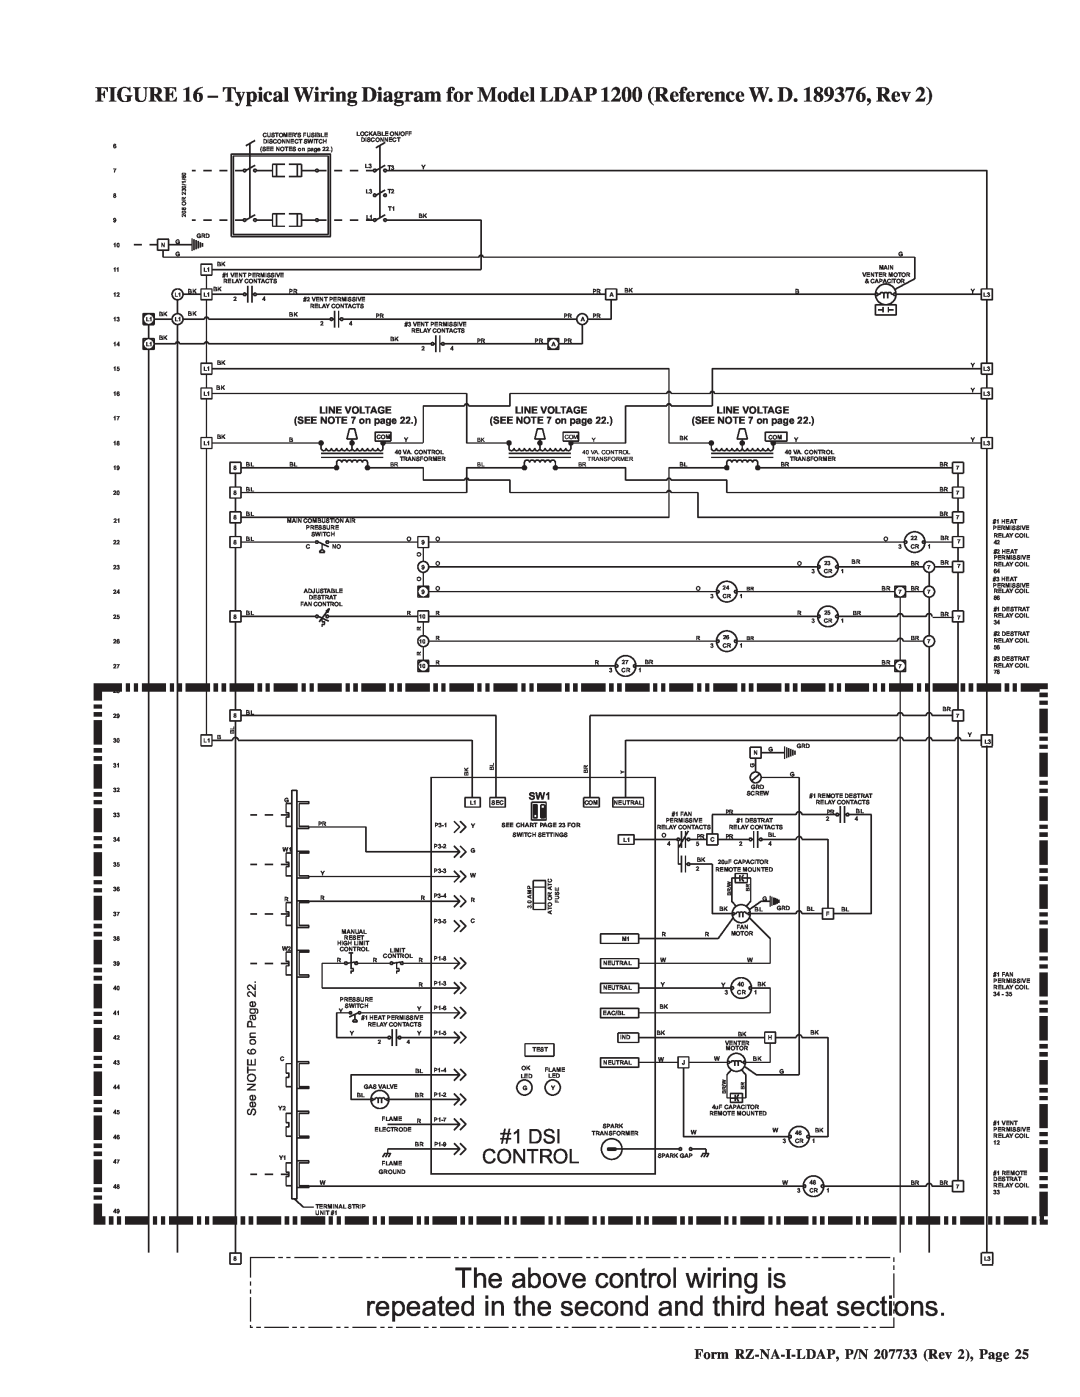 Thomas & Betts LDAP 1200 The above control wiring is, repeated in the second and third heat sections, Page, Line Voltage 